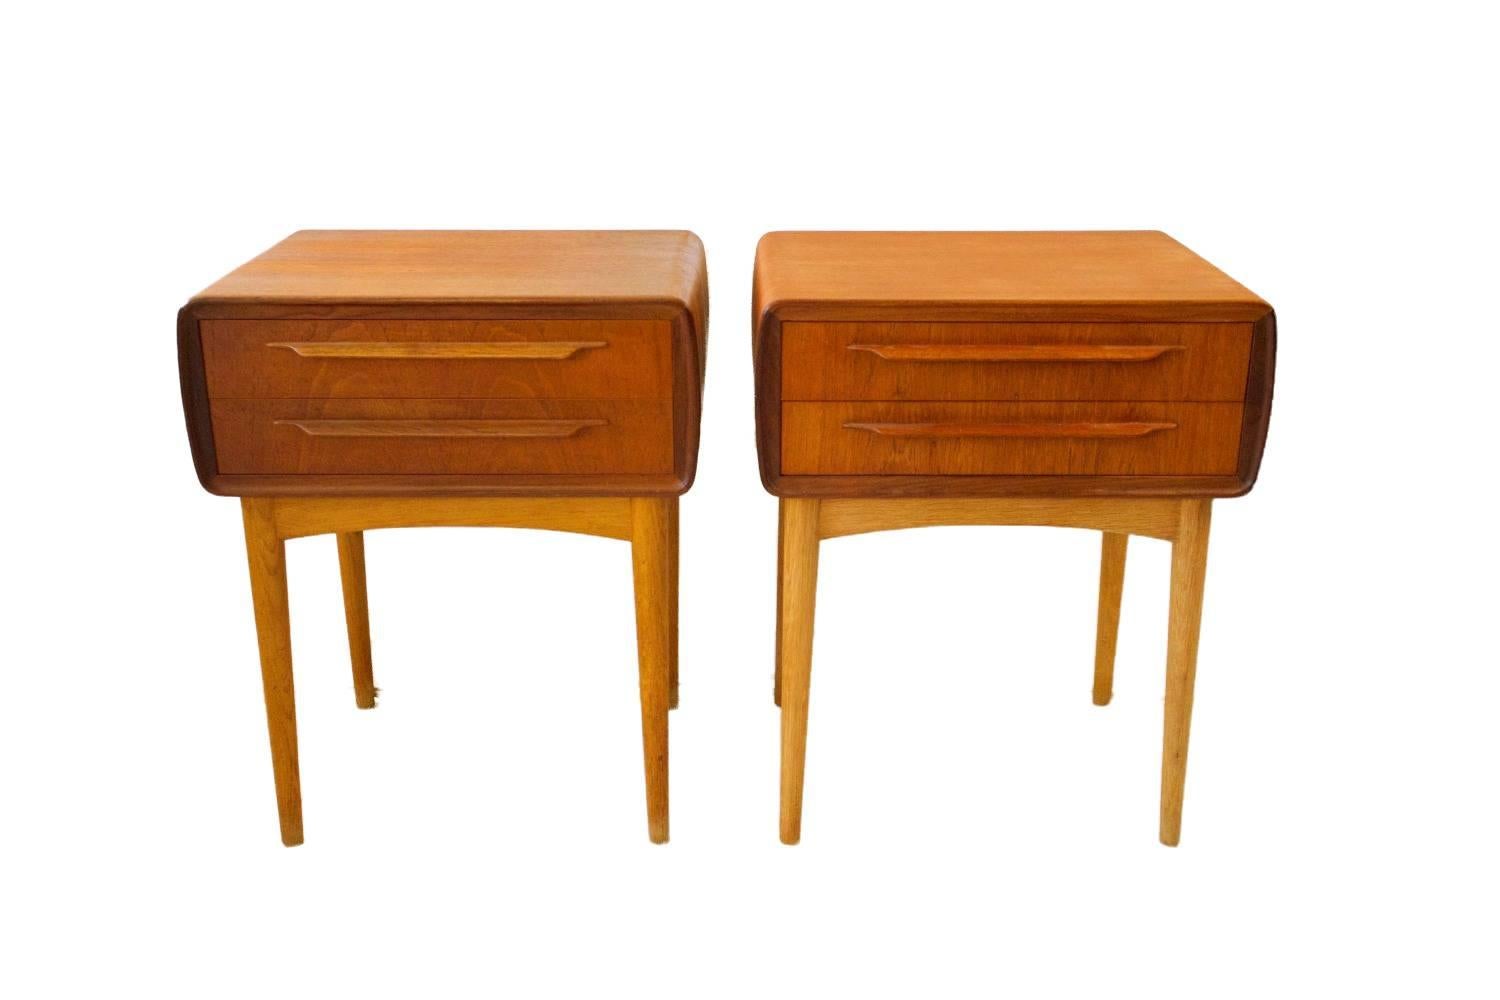 Tall night tables by Danish designer Johannes Andersen. These cube-shaped tables in teak come with an oak frame and legs made of oak. The two drawers has a molded edge. They are both in great vintage condition. Note it is the small fine model. A